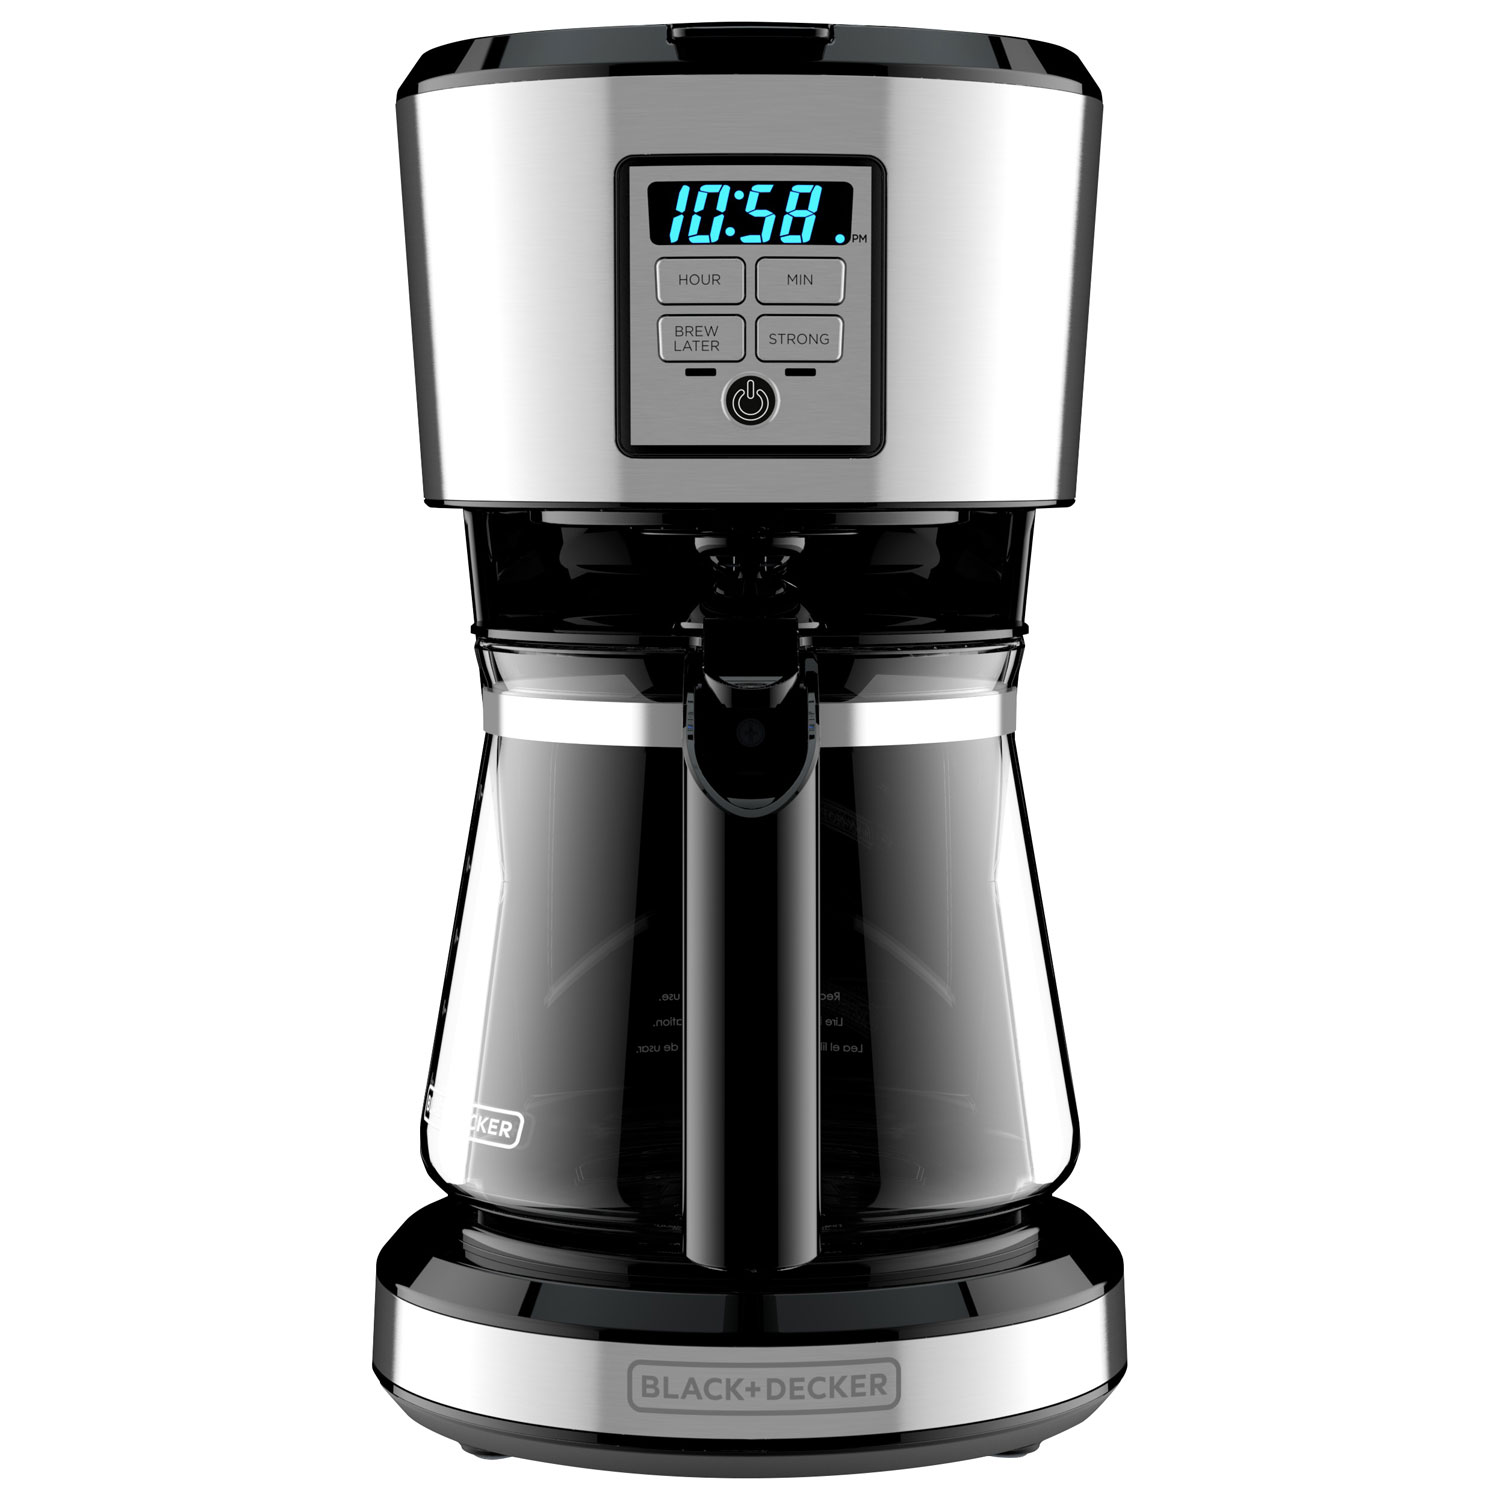 Black and Decker Programmable Coffee Maker - 12-Cup